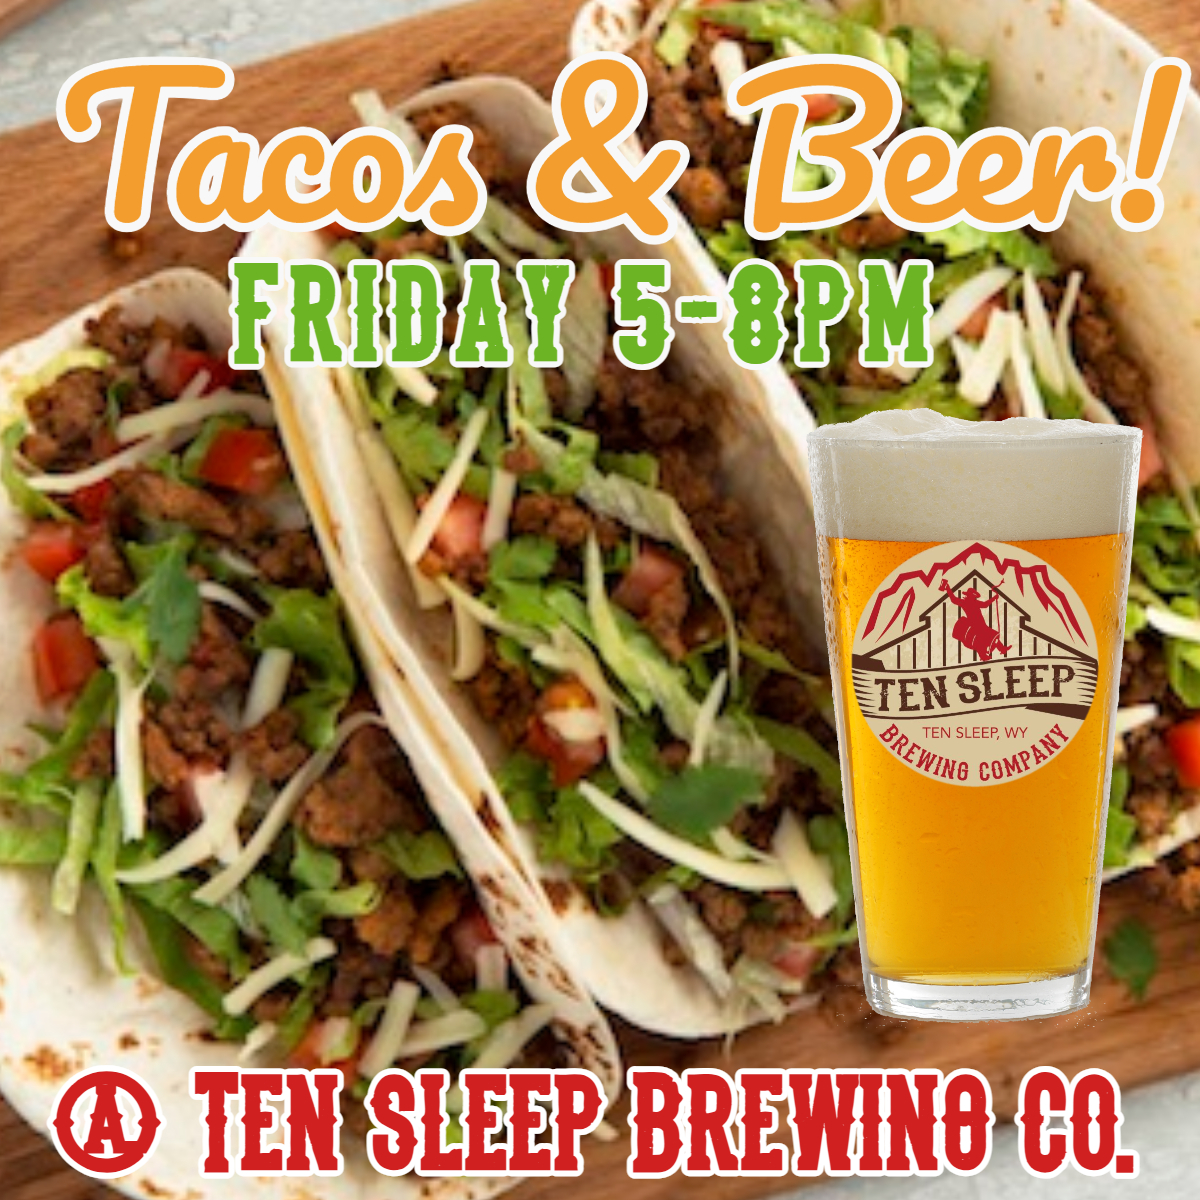 Friday Night Tacos in the Taproom!